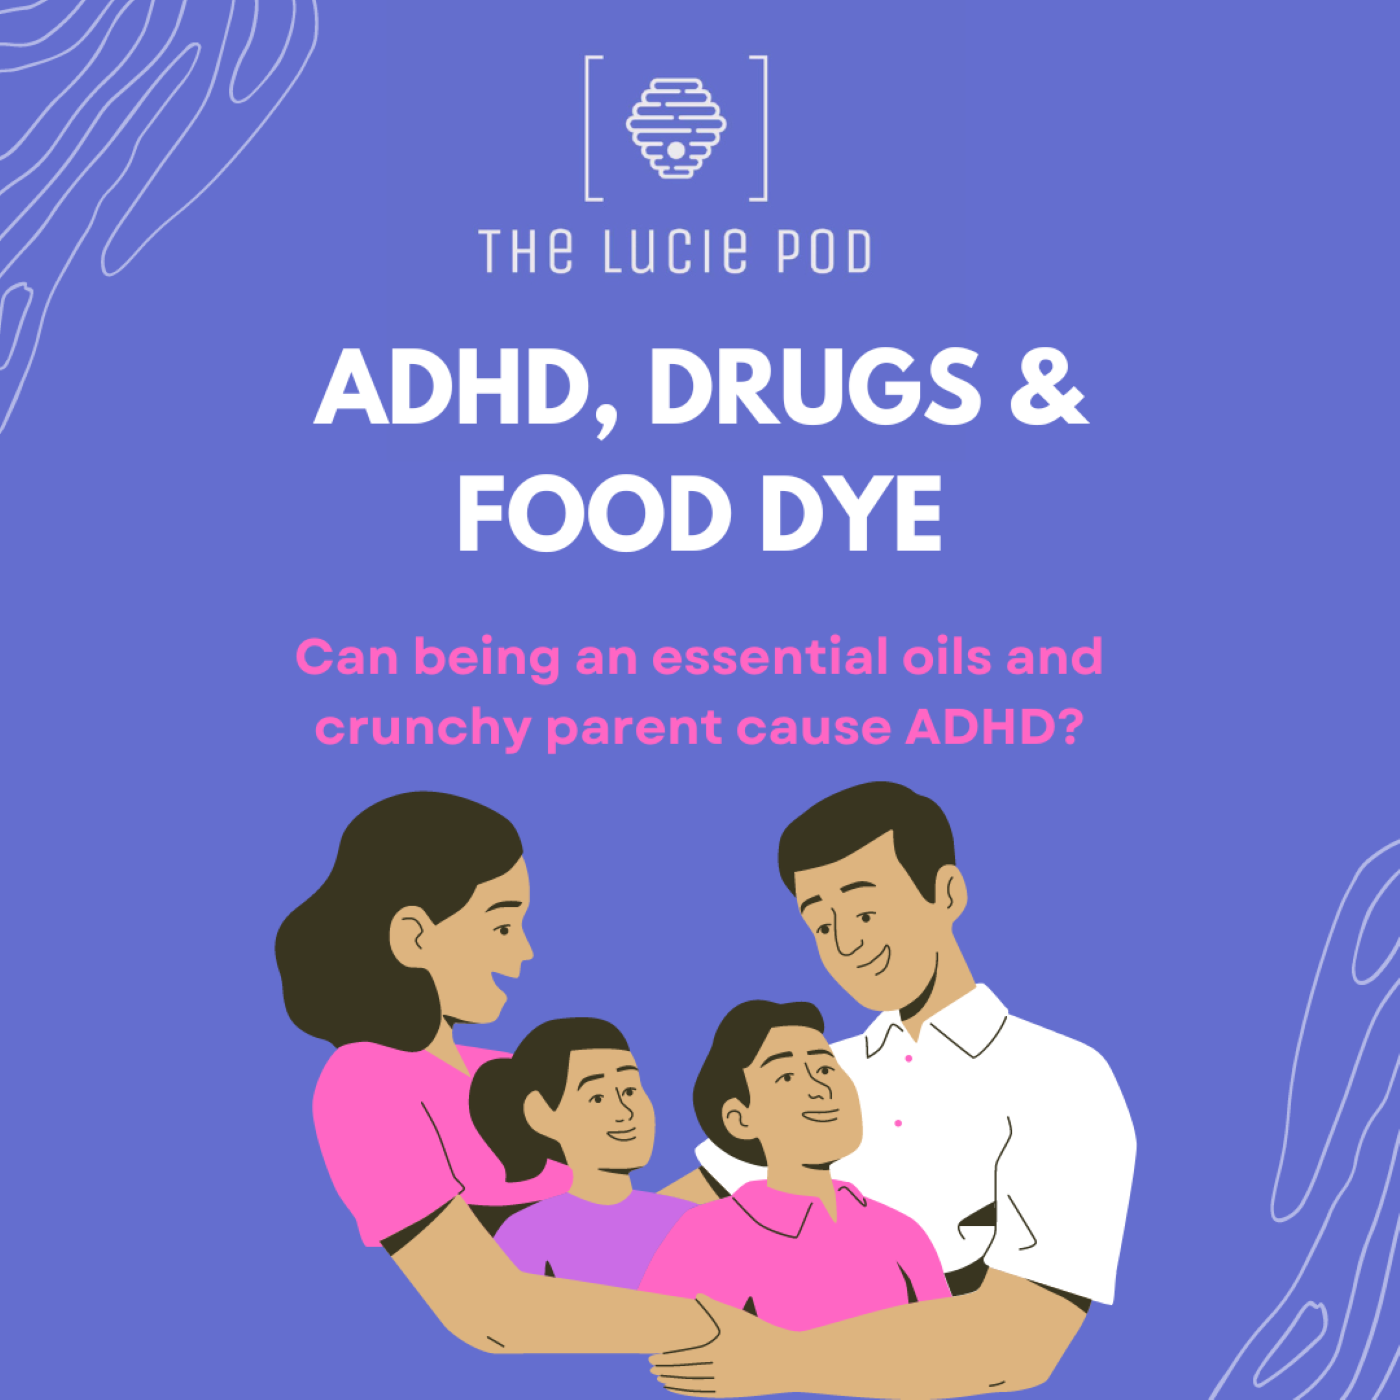 Can being an essential oils and crunchy parent cause ADHD?